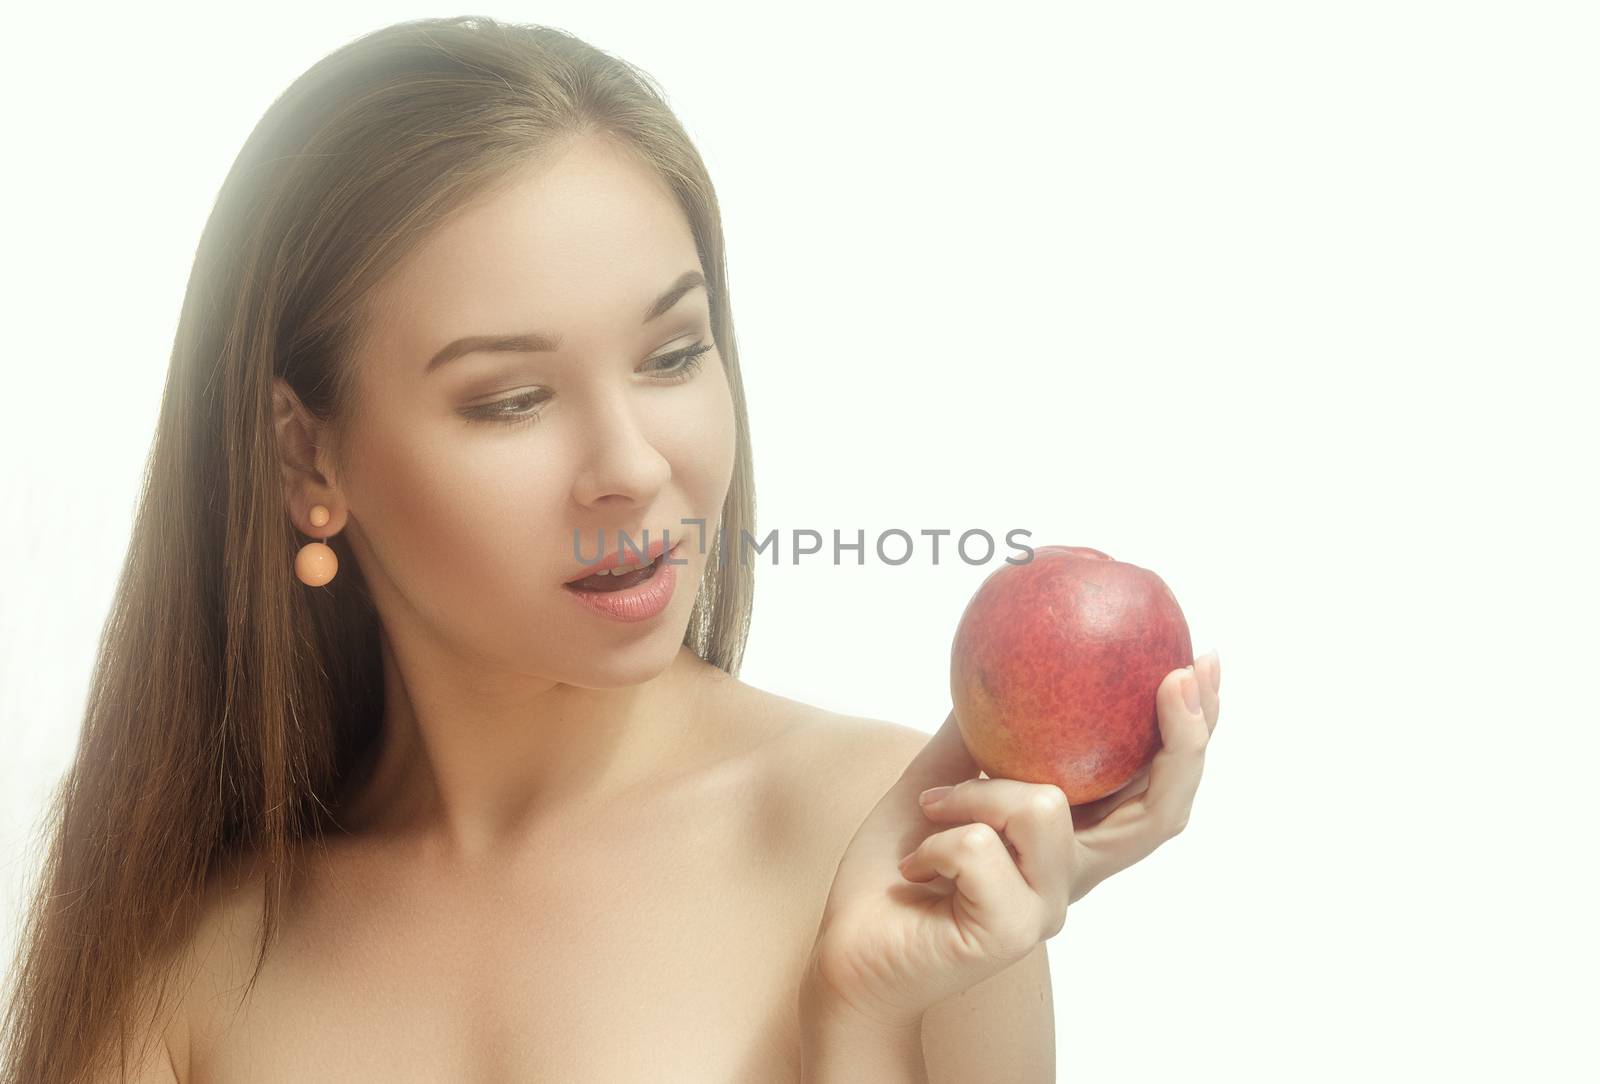 Young, tender, cheerful woman holding a peach in her hand and smiling. White background